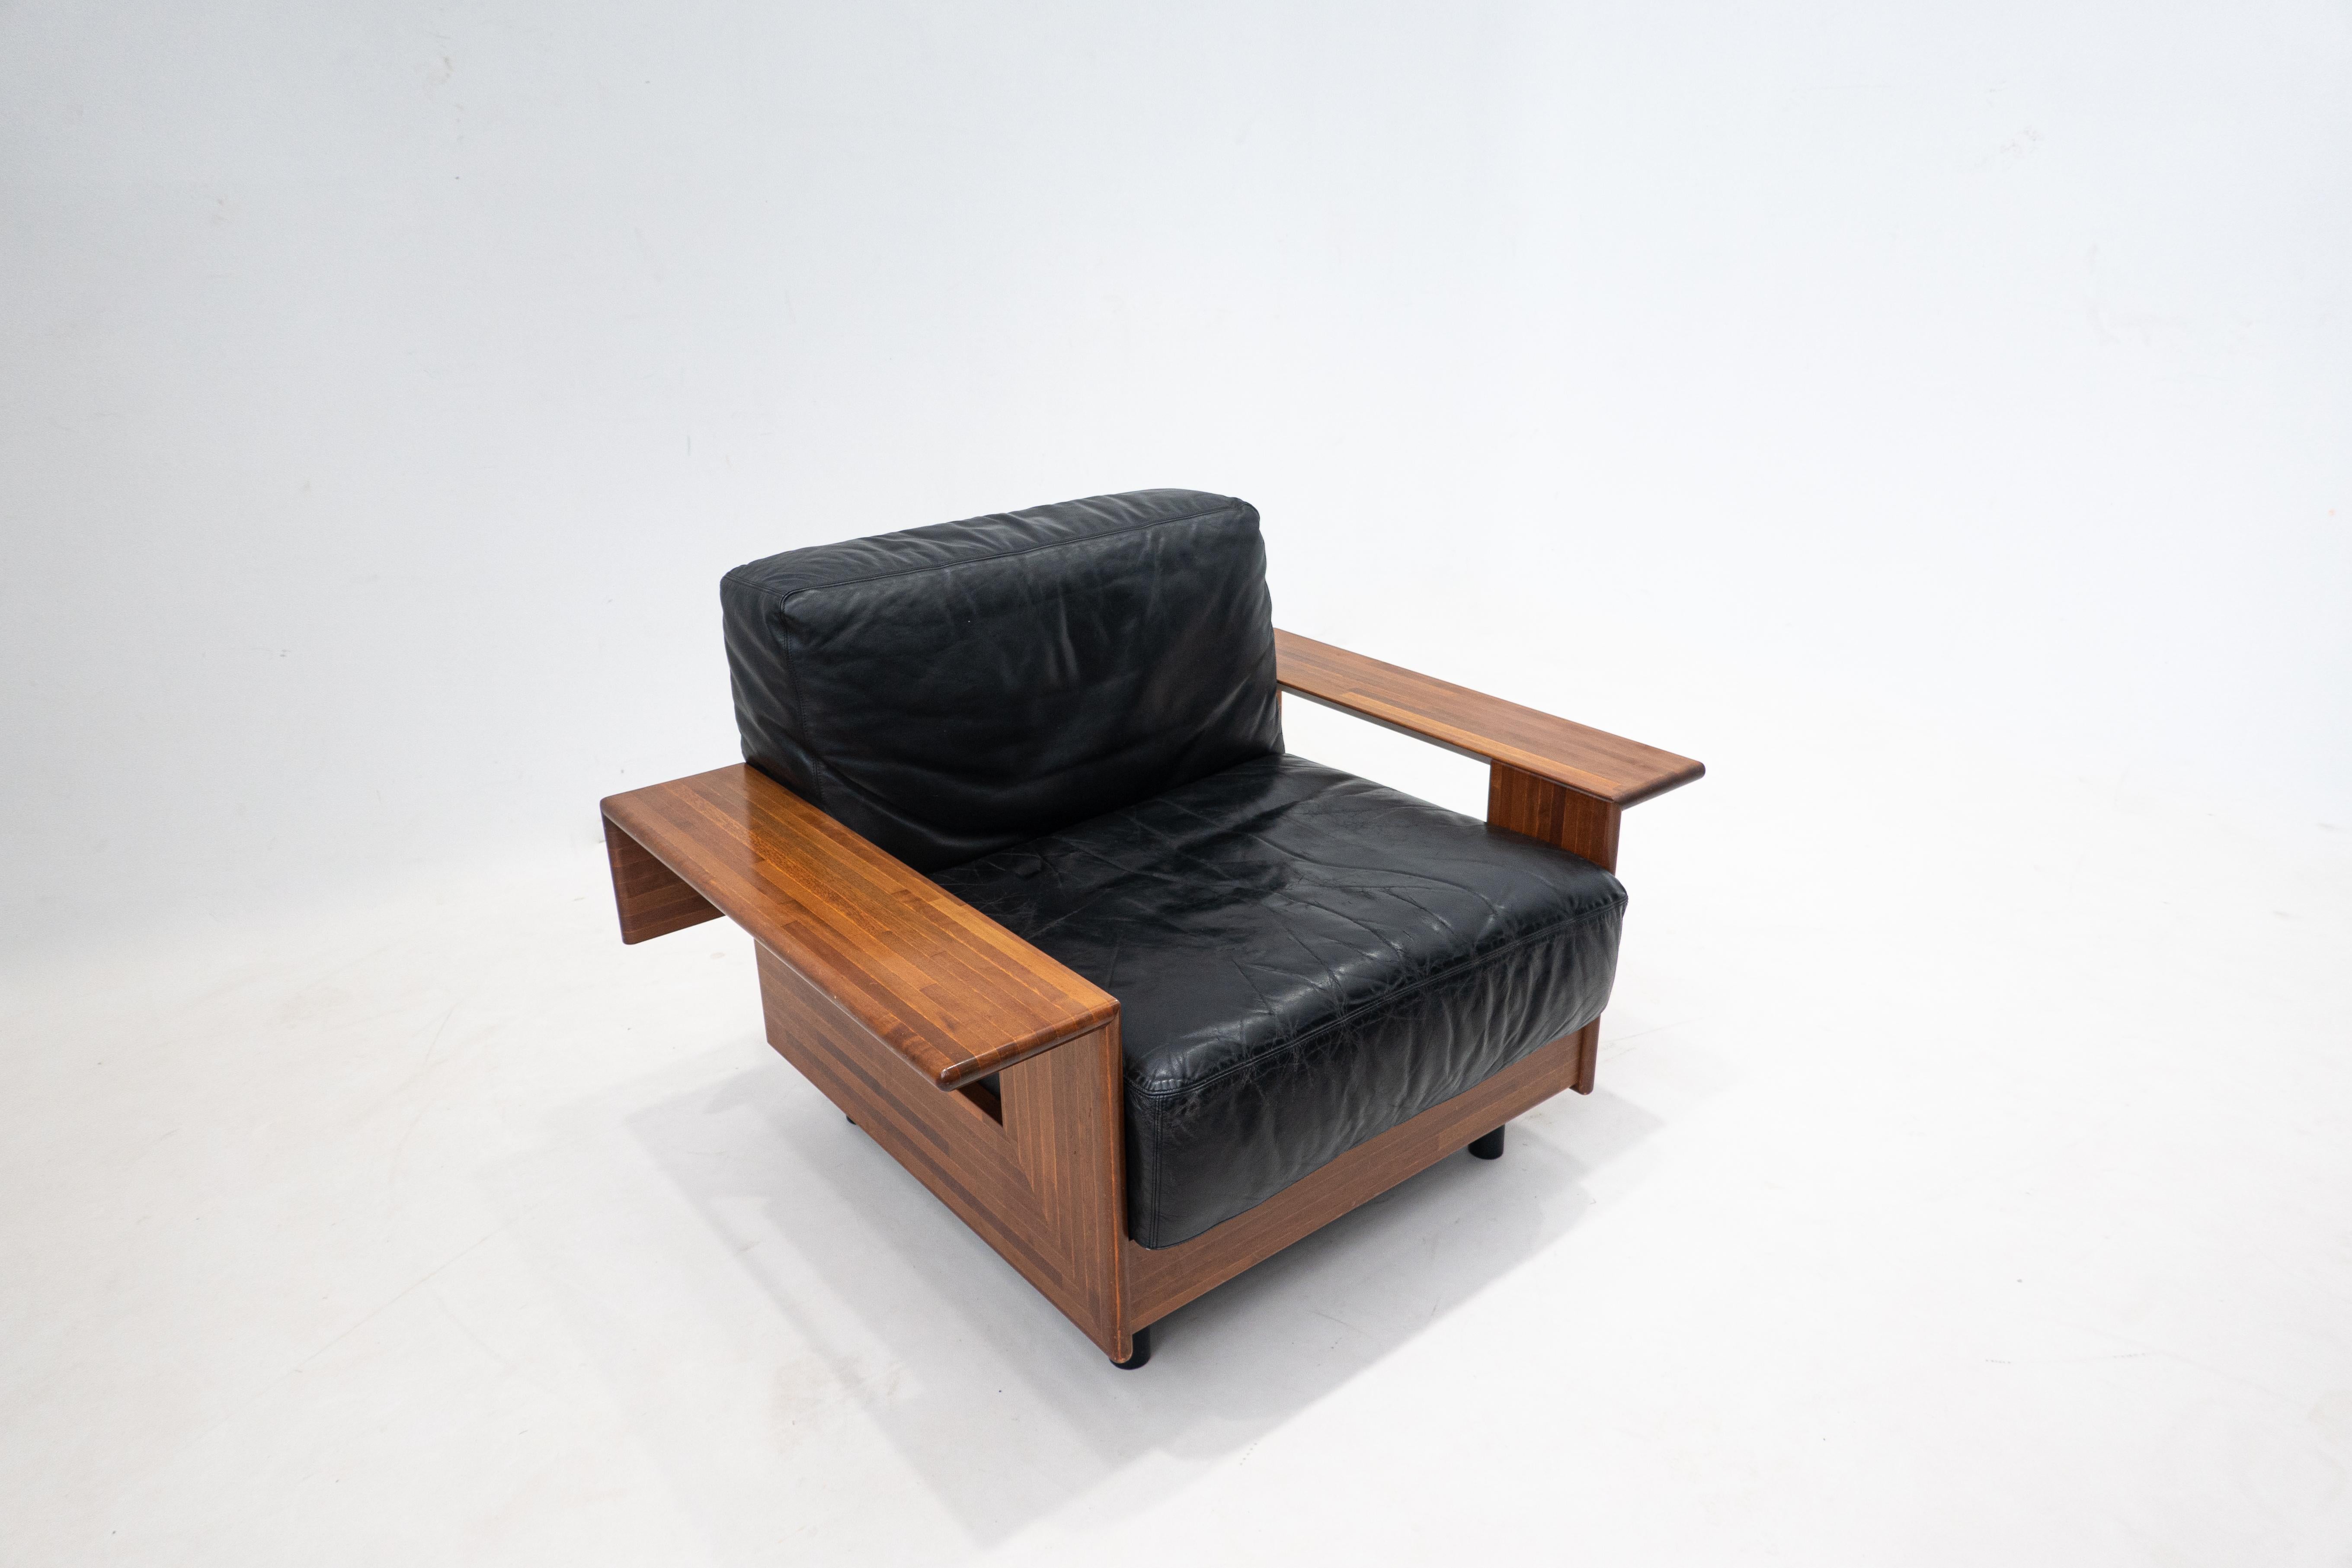 Mid-Century Modern Armchair in the style of Tobia Scarpa, wood and leather.